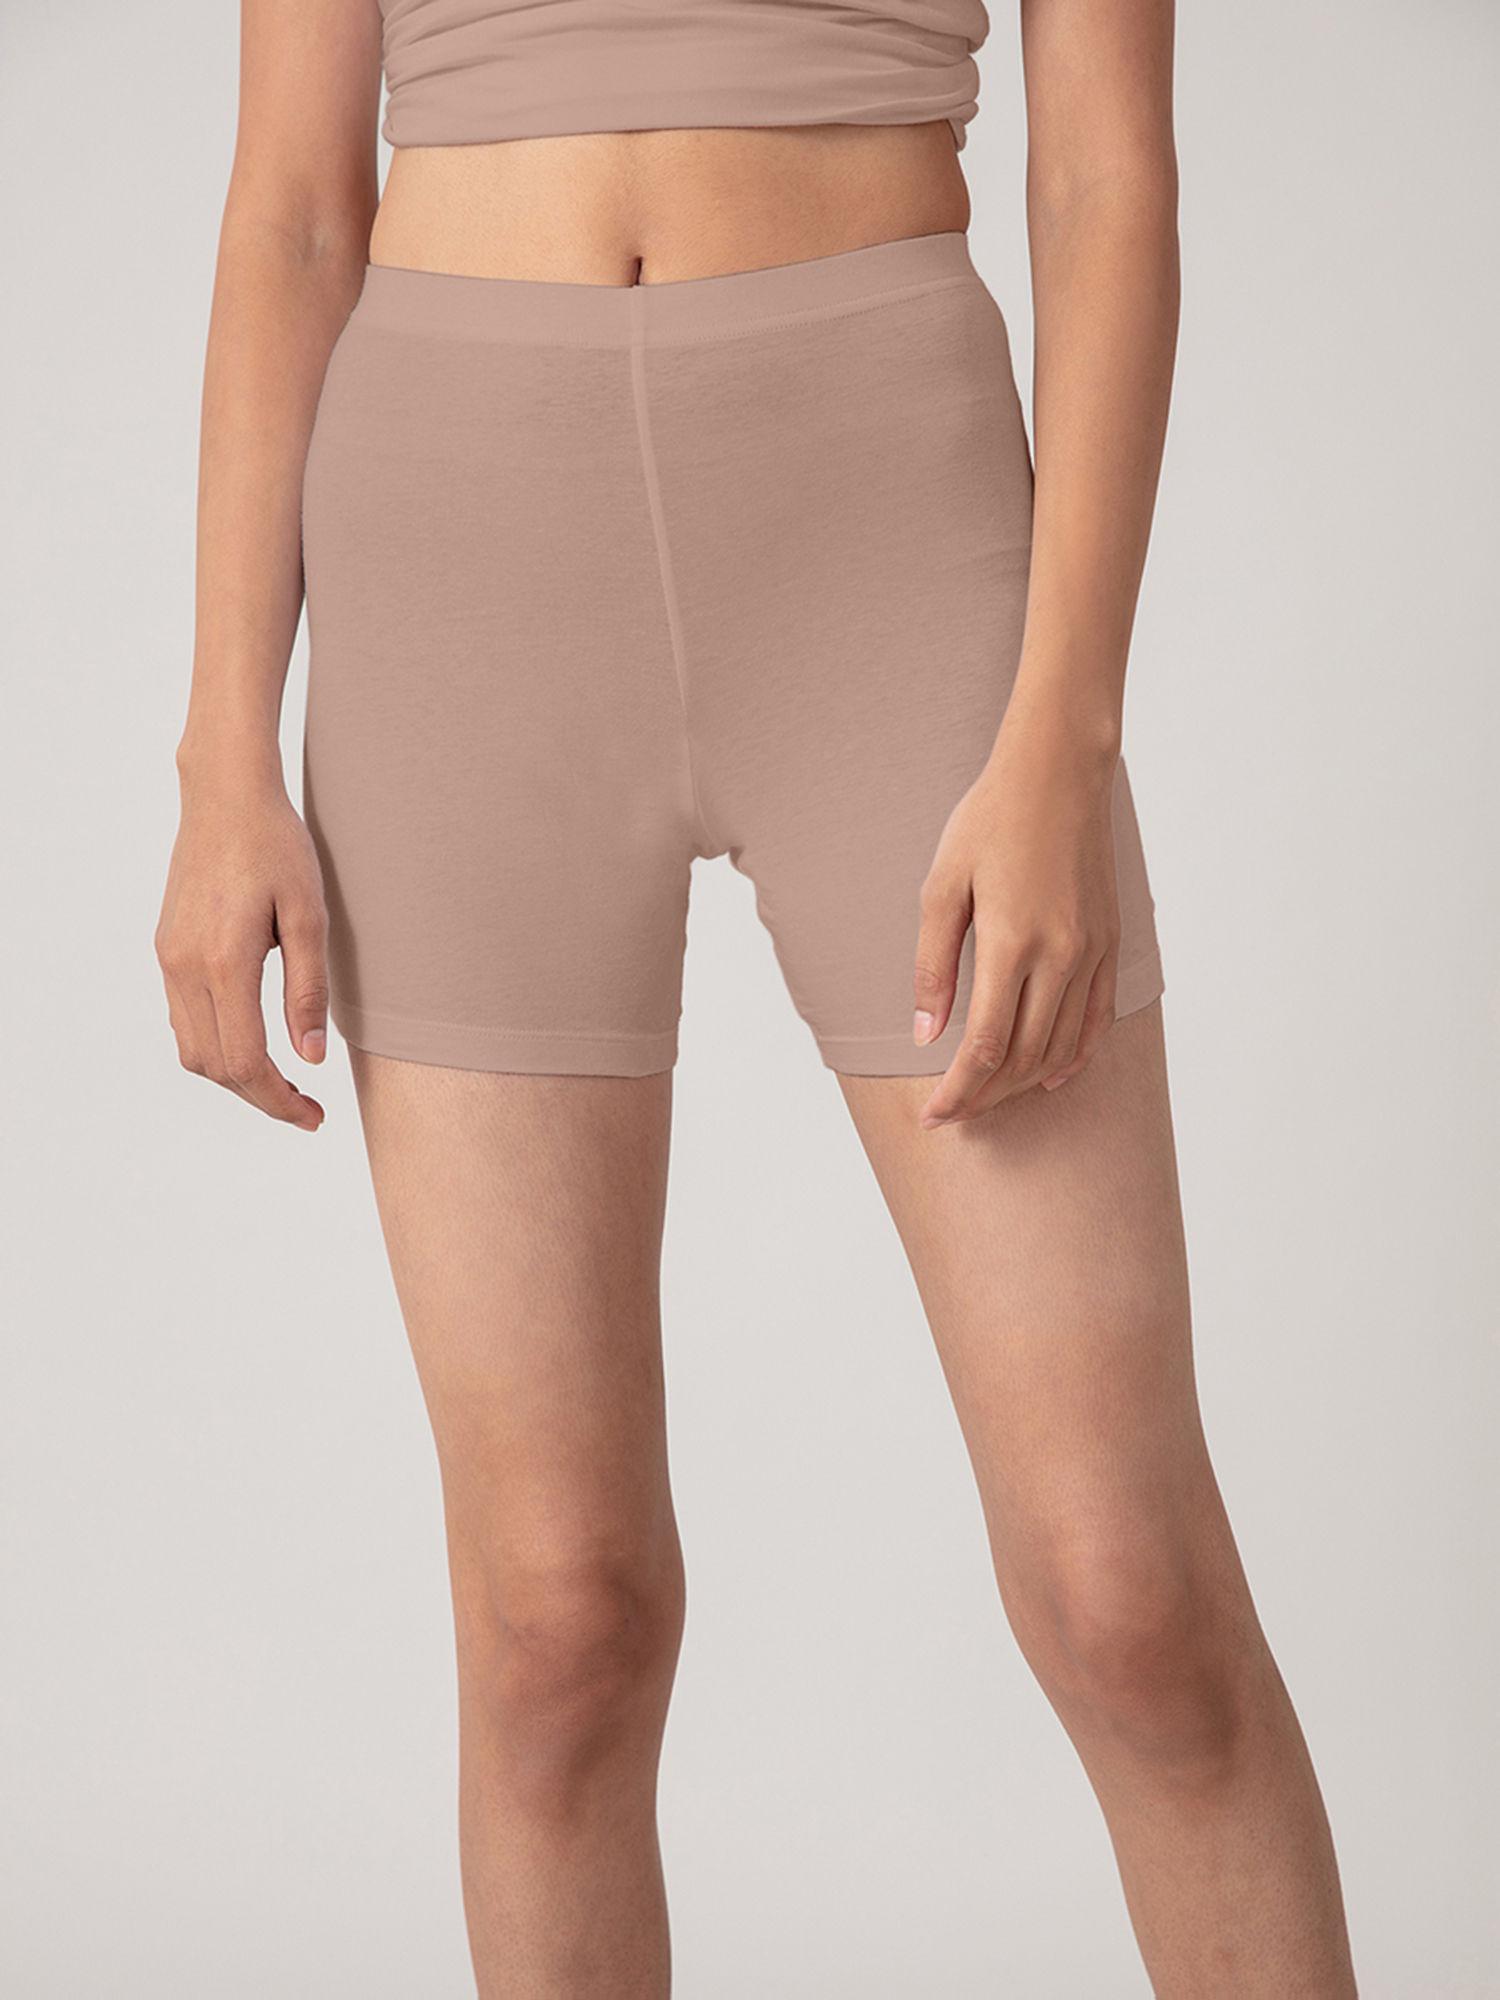 stretch cotton cycling shorts - roebuck nude nyp083